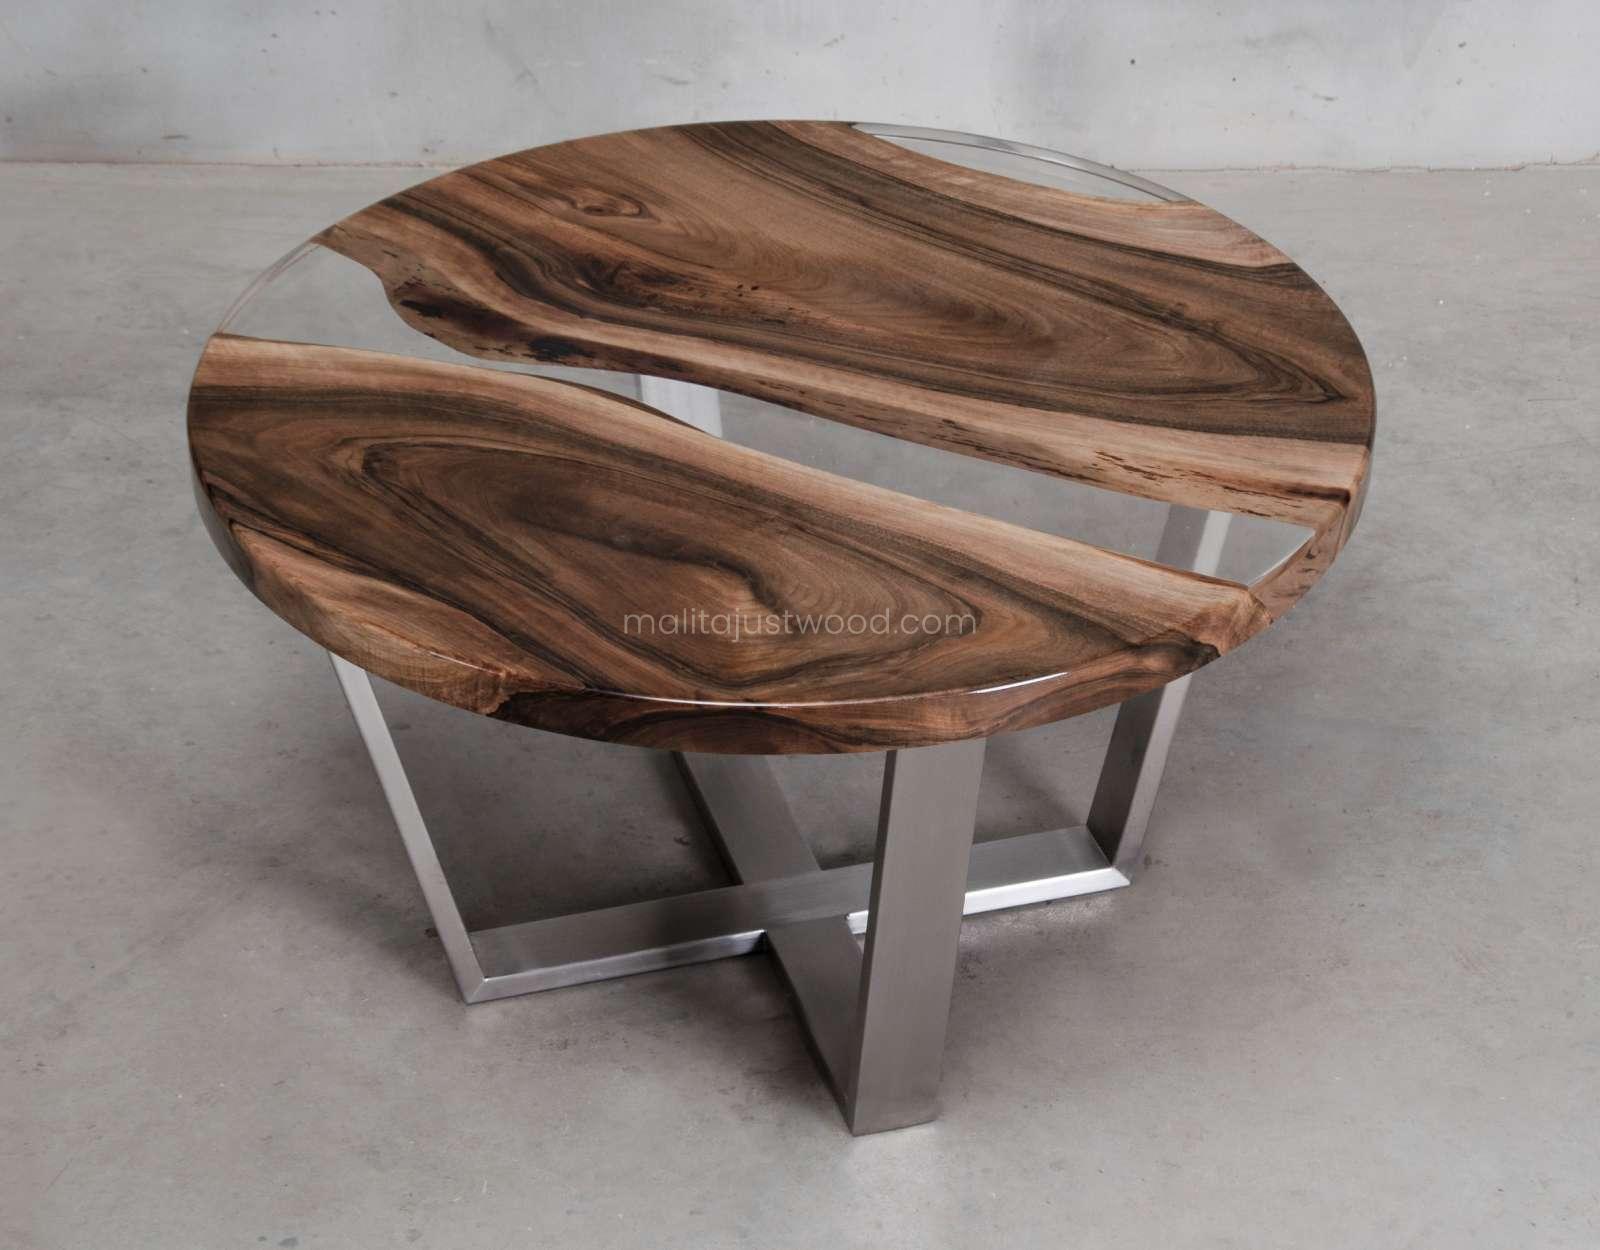 walnut coffee table Ferro made of wood and metal